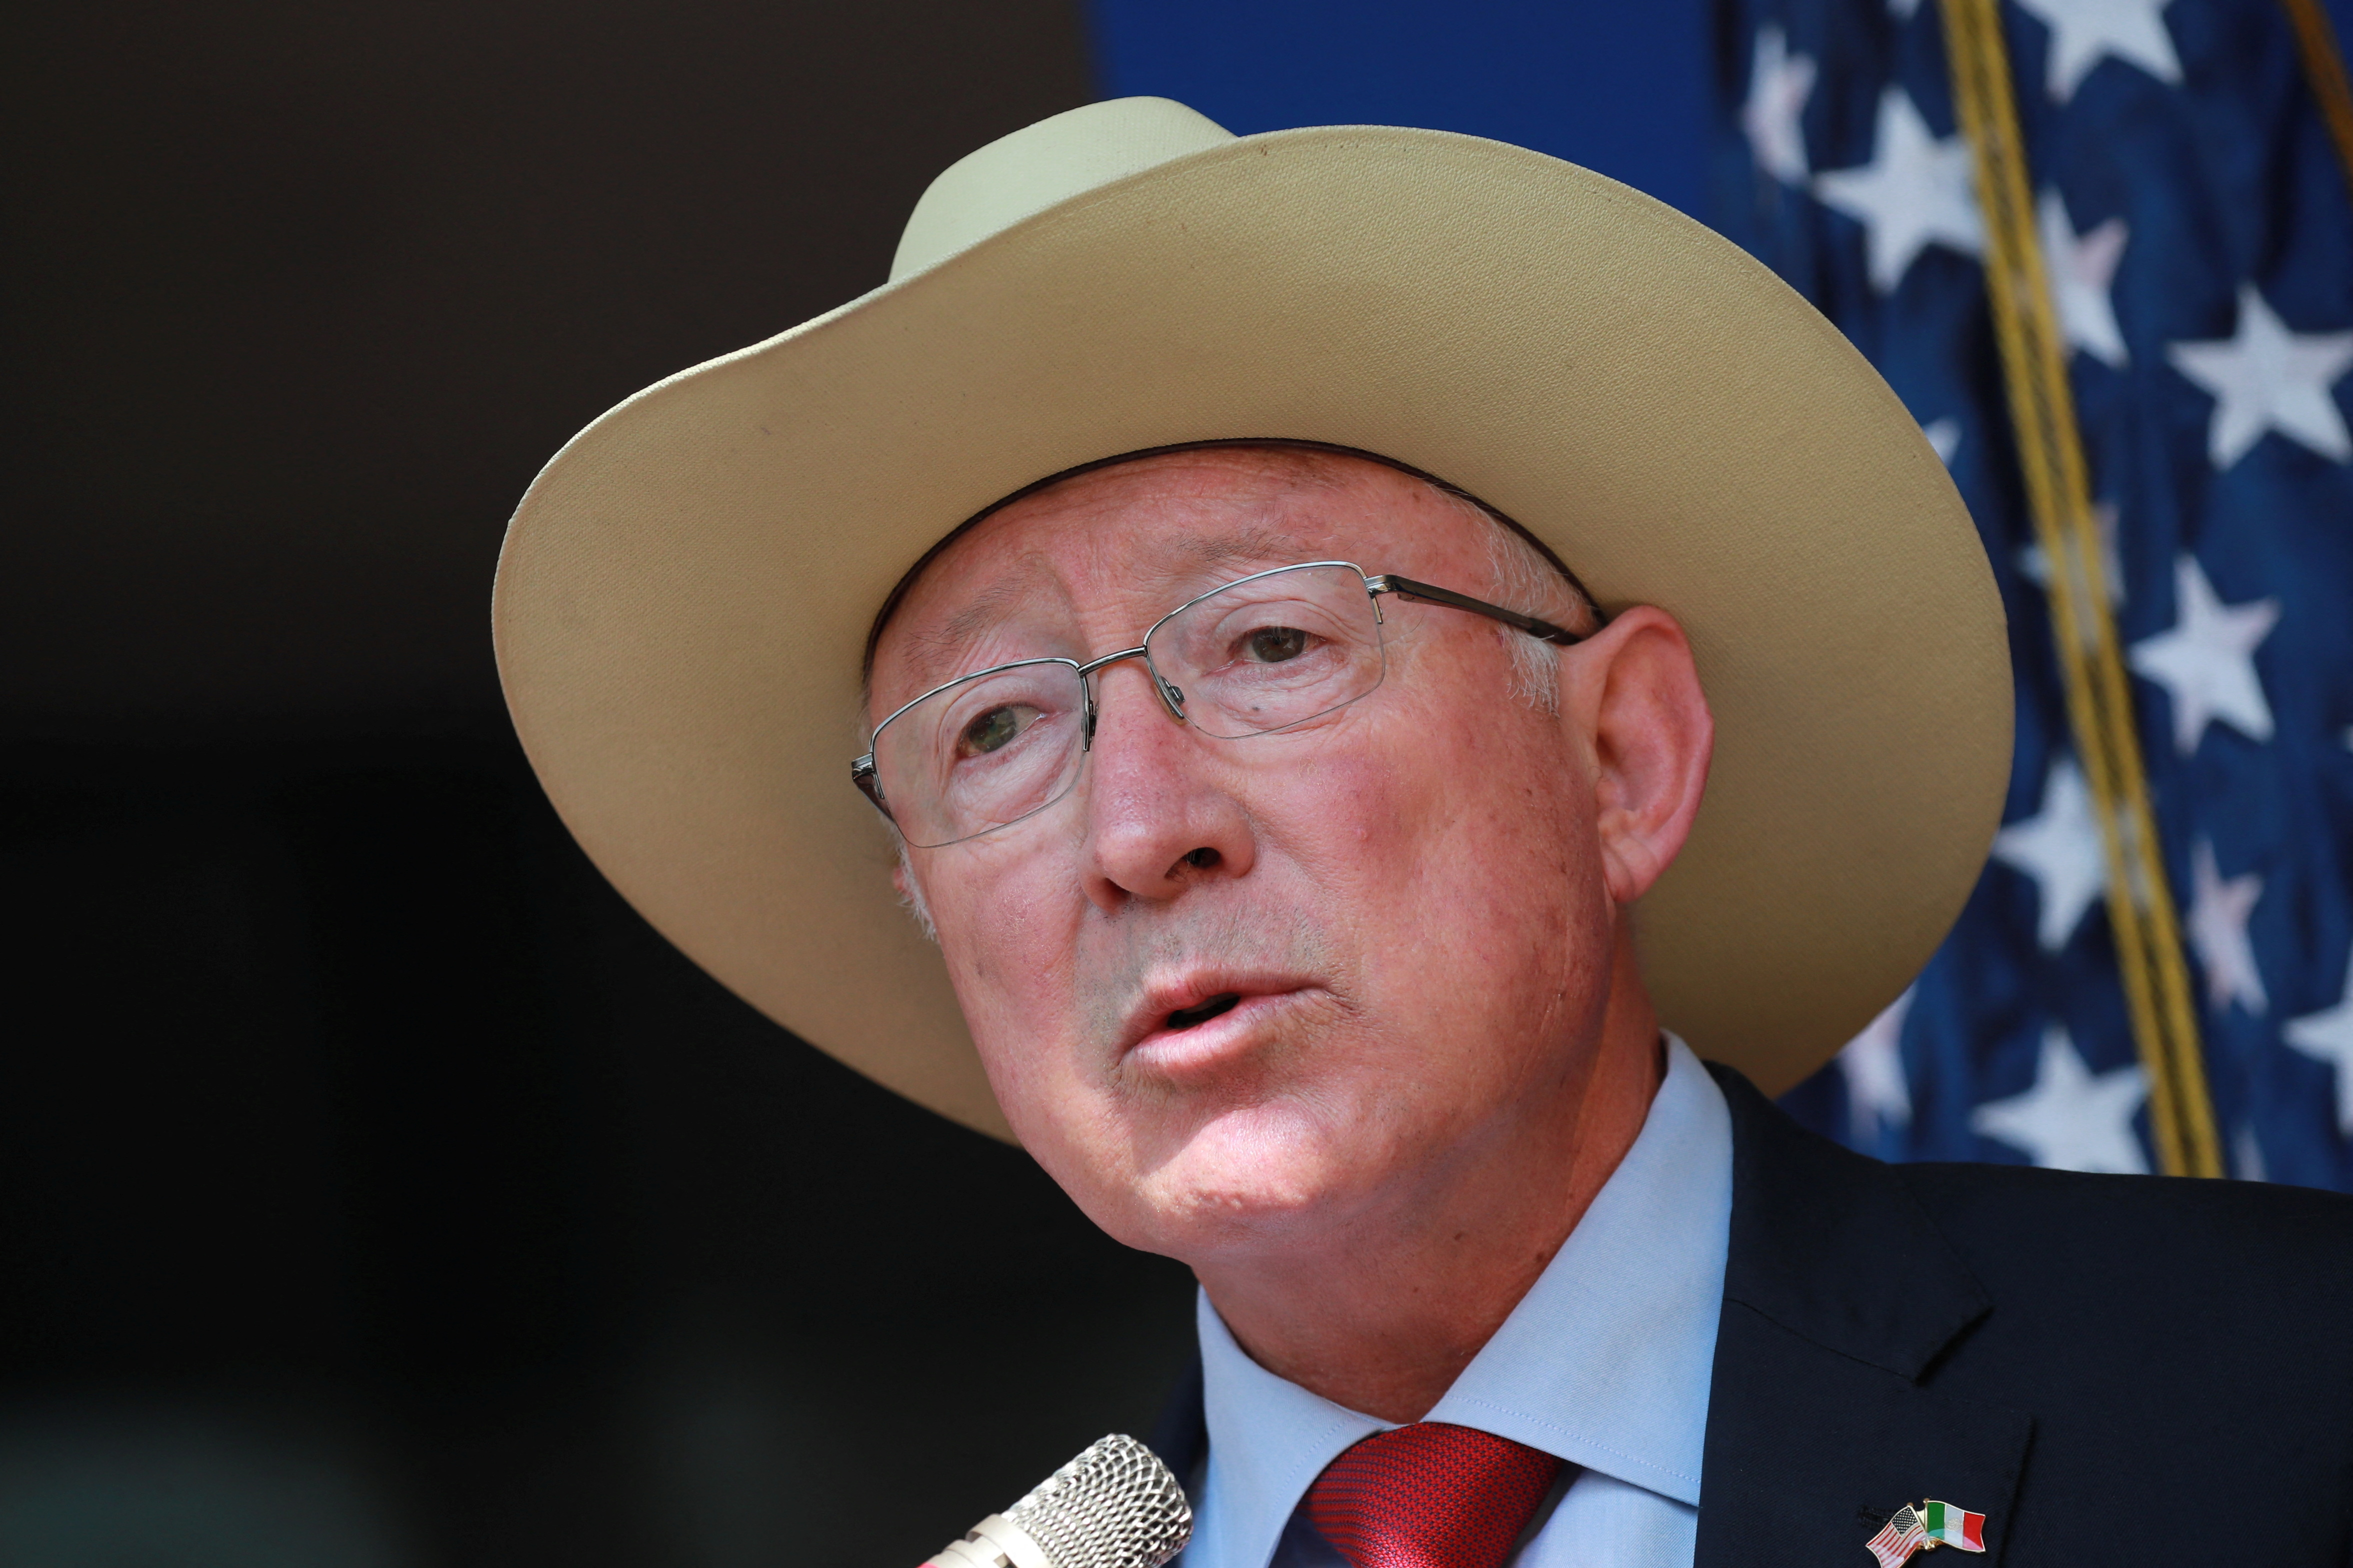 U.S. Ambassador to Mexico Ken Salazar holds a news conference at his home to discuss outcomes from the North American Leaders' Summit held in Mexico City, Mexico January 11, 2023. REUTERS/Henry Romero